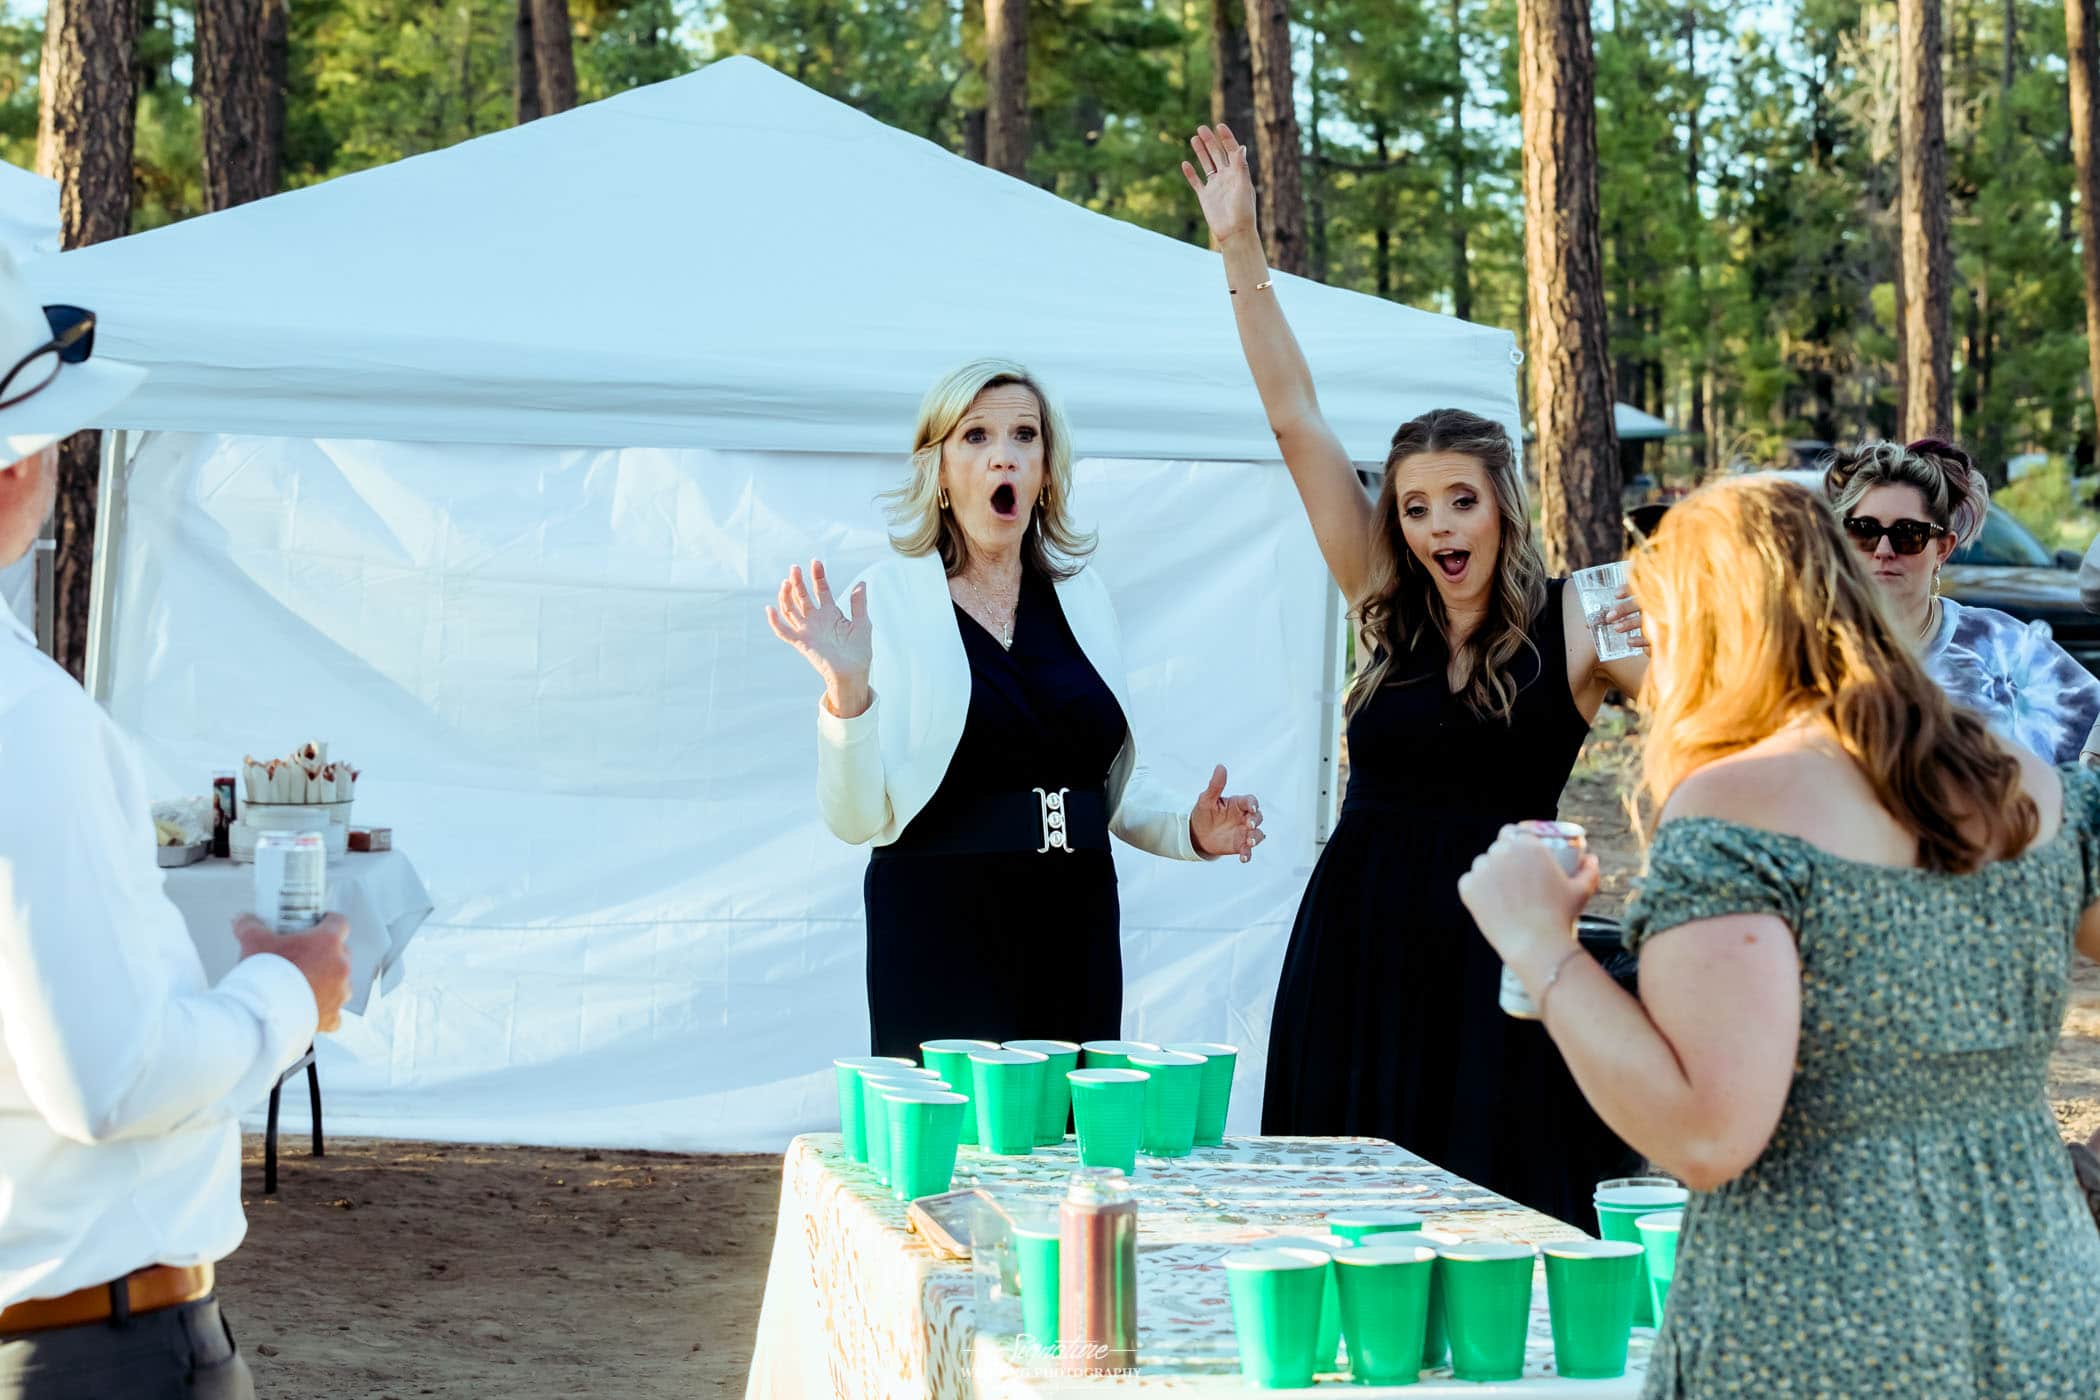 Wedding guests playing beer pong game outside